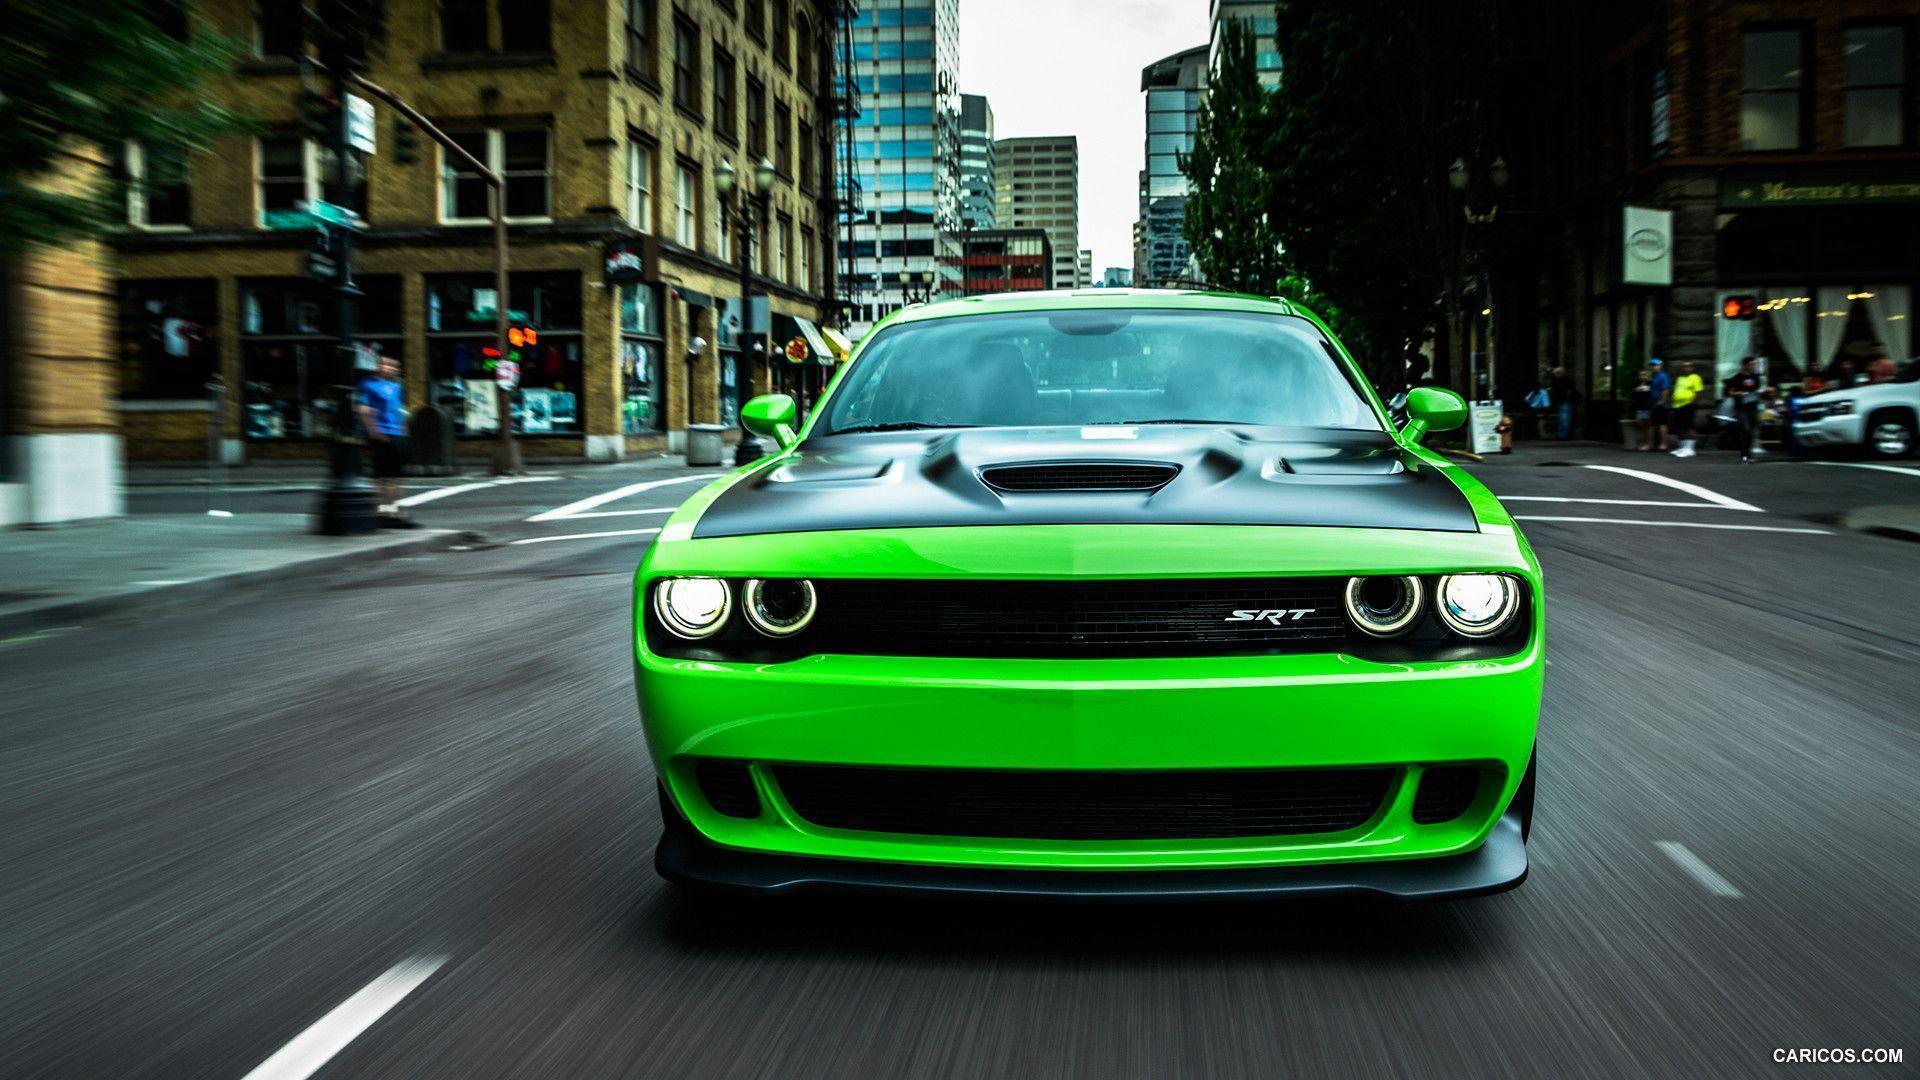 Dodge Challenger Wallpapers Group with items